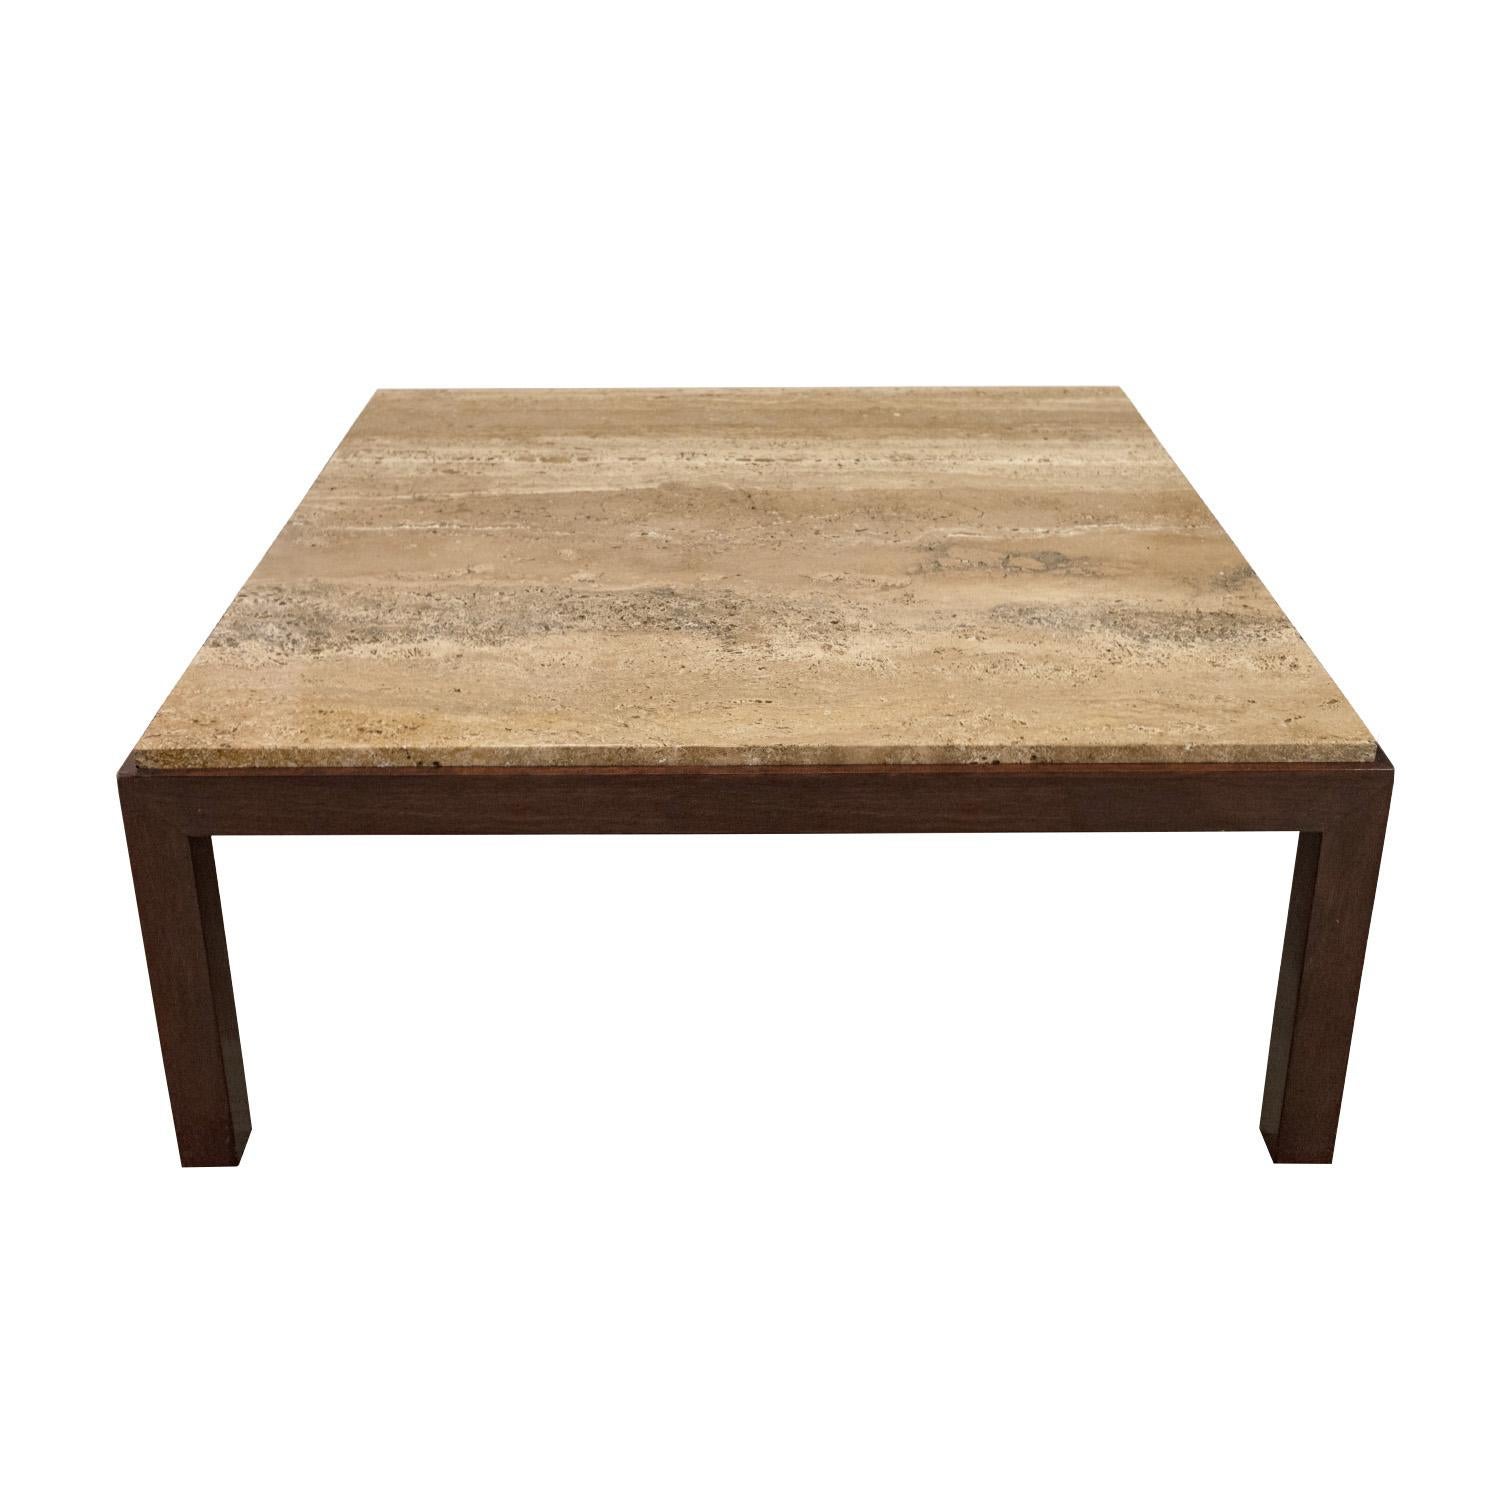 Parsons style coffee table model No. 5206, base in dark mahogany with inset Italian travertine top, by Edward Wormley for Dunbar, American 1952 (metal and paper labels on bottom). Edward Wormley was known for his elegant designs utilizing